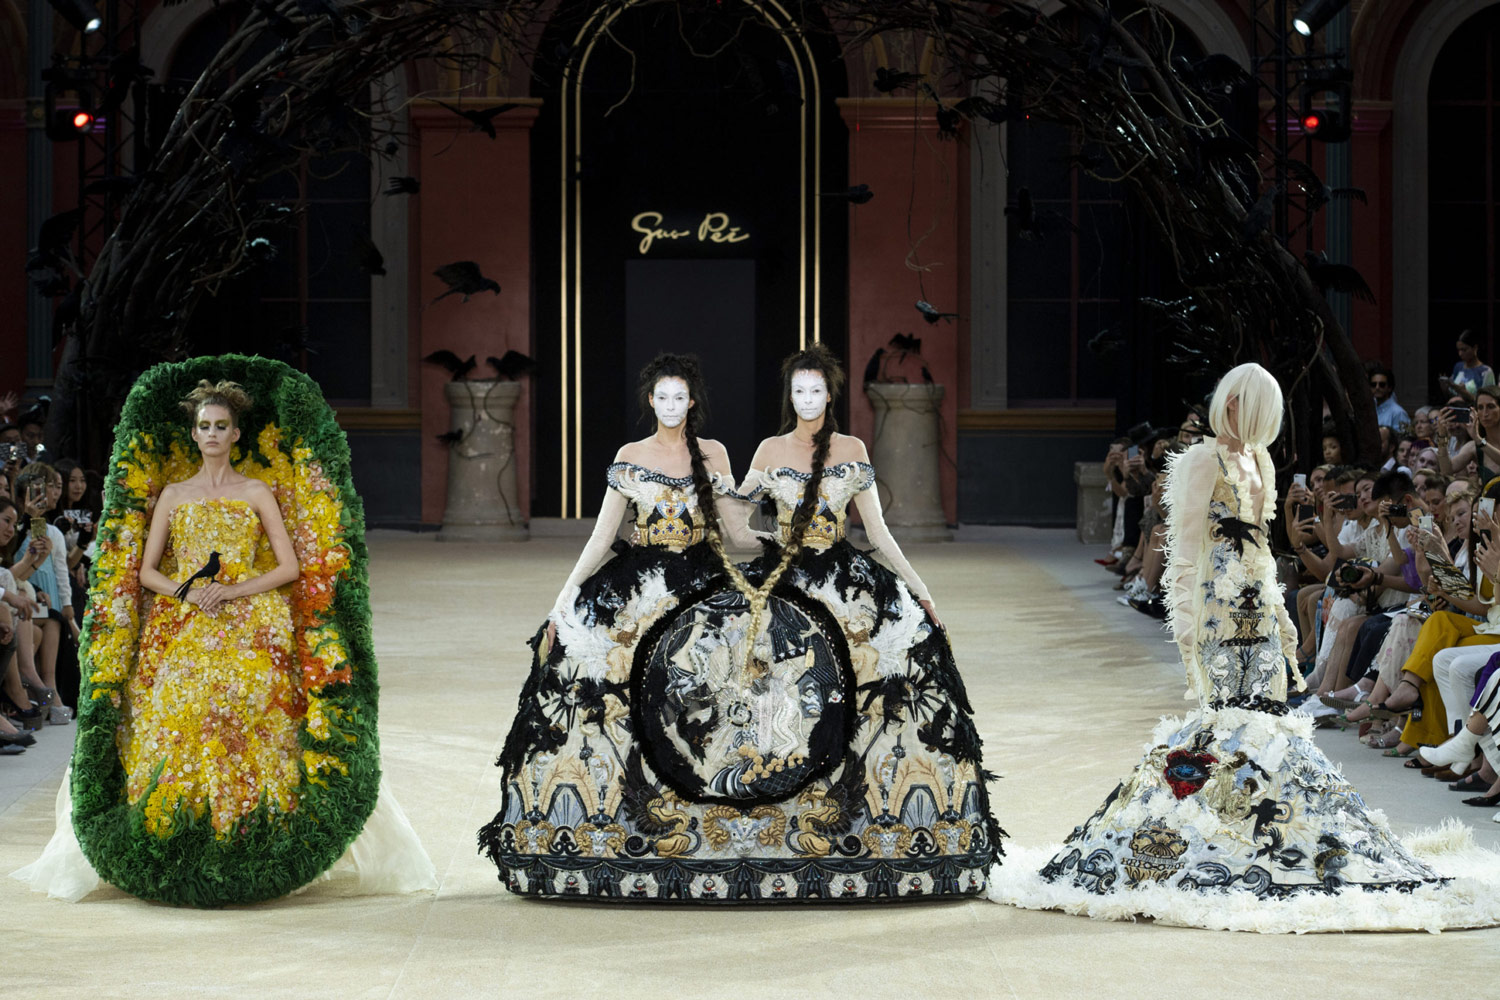 Guo Pei presents her Autumn/Winter 2019/20 Haute Couture collection